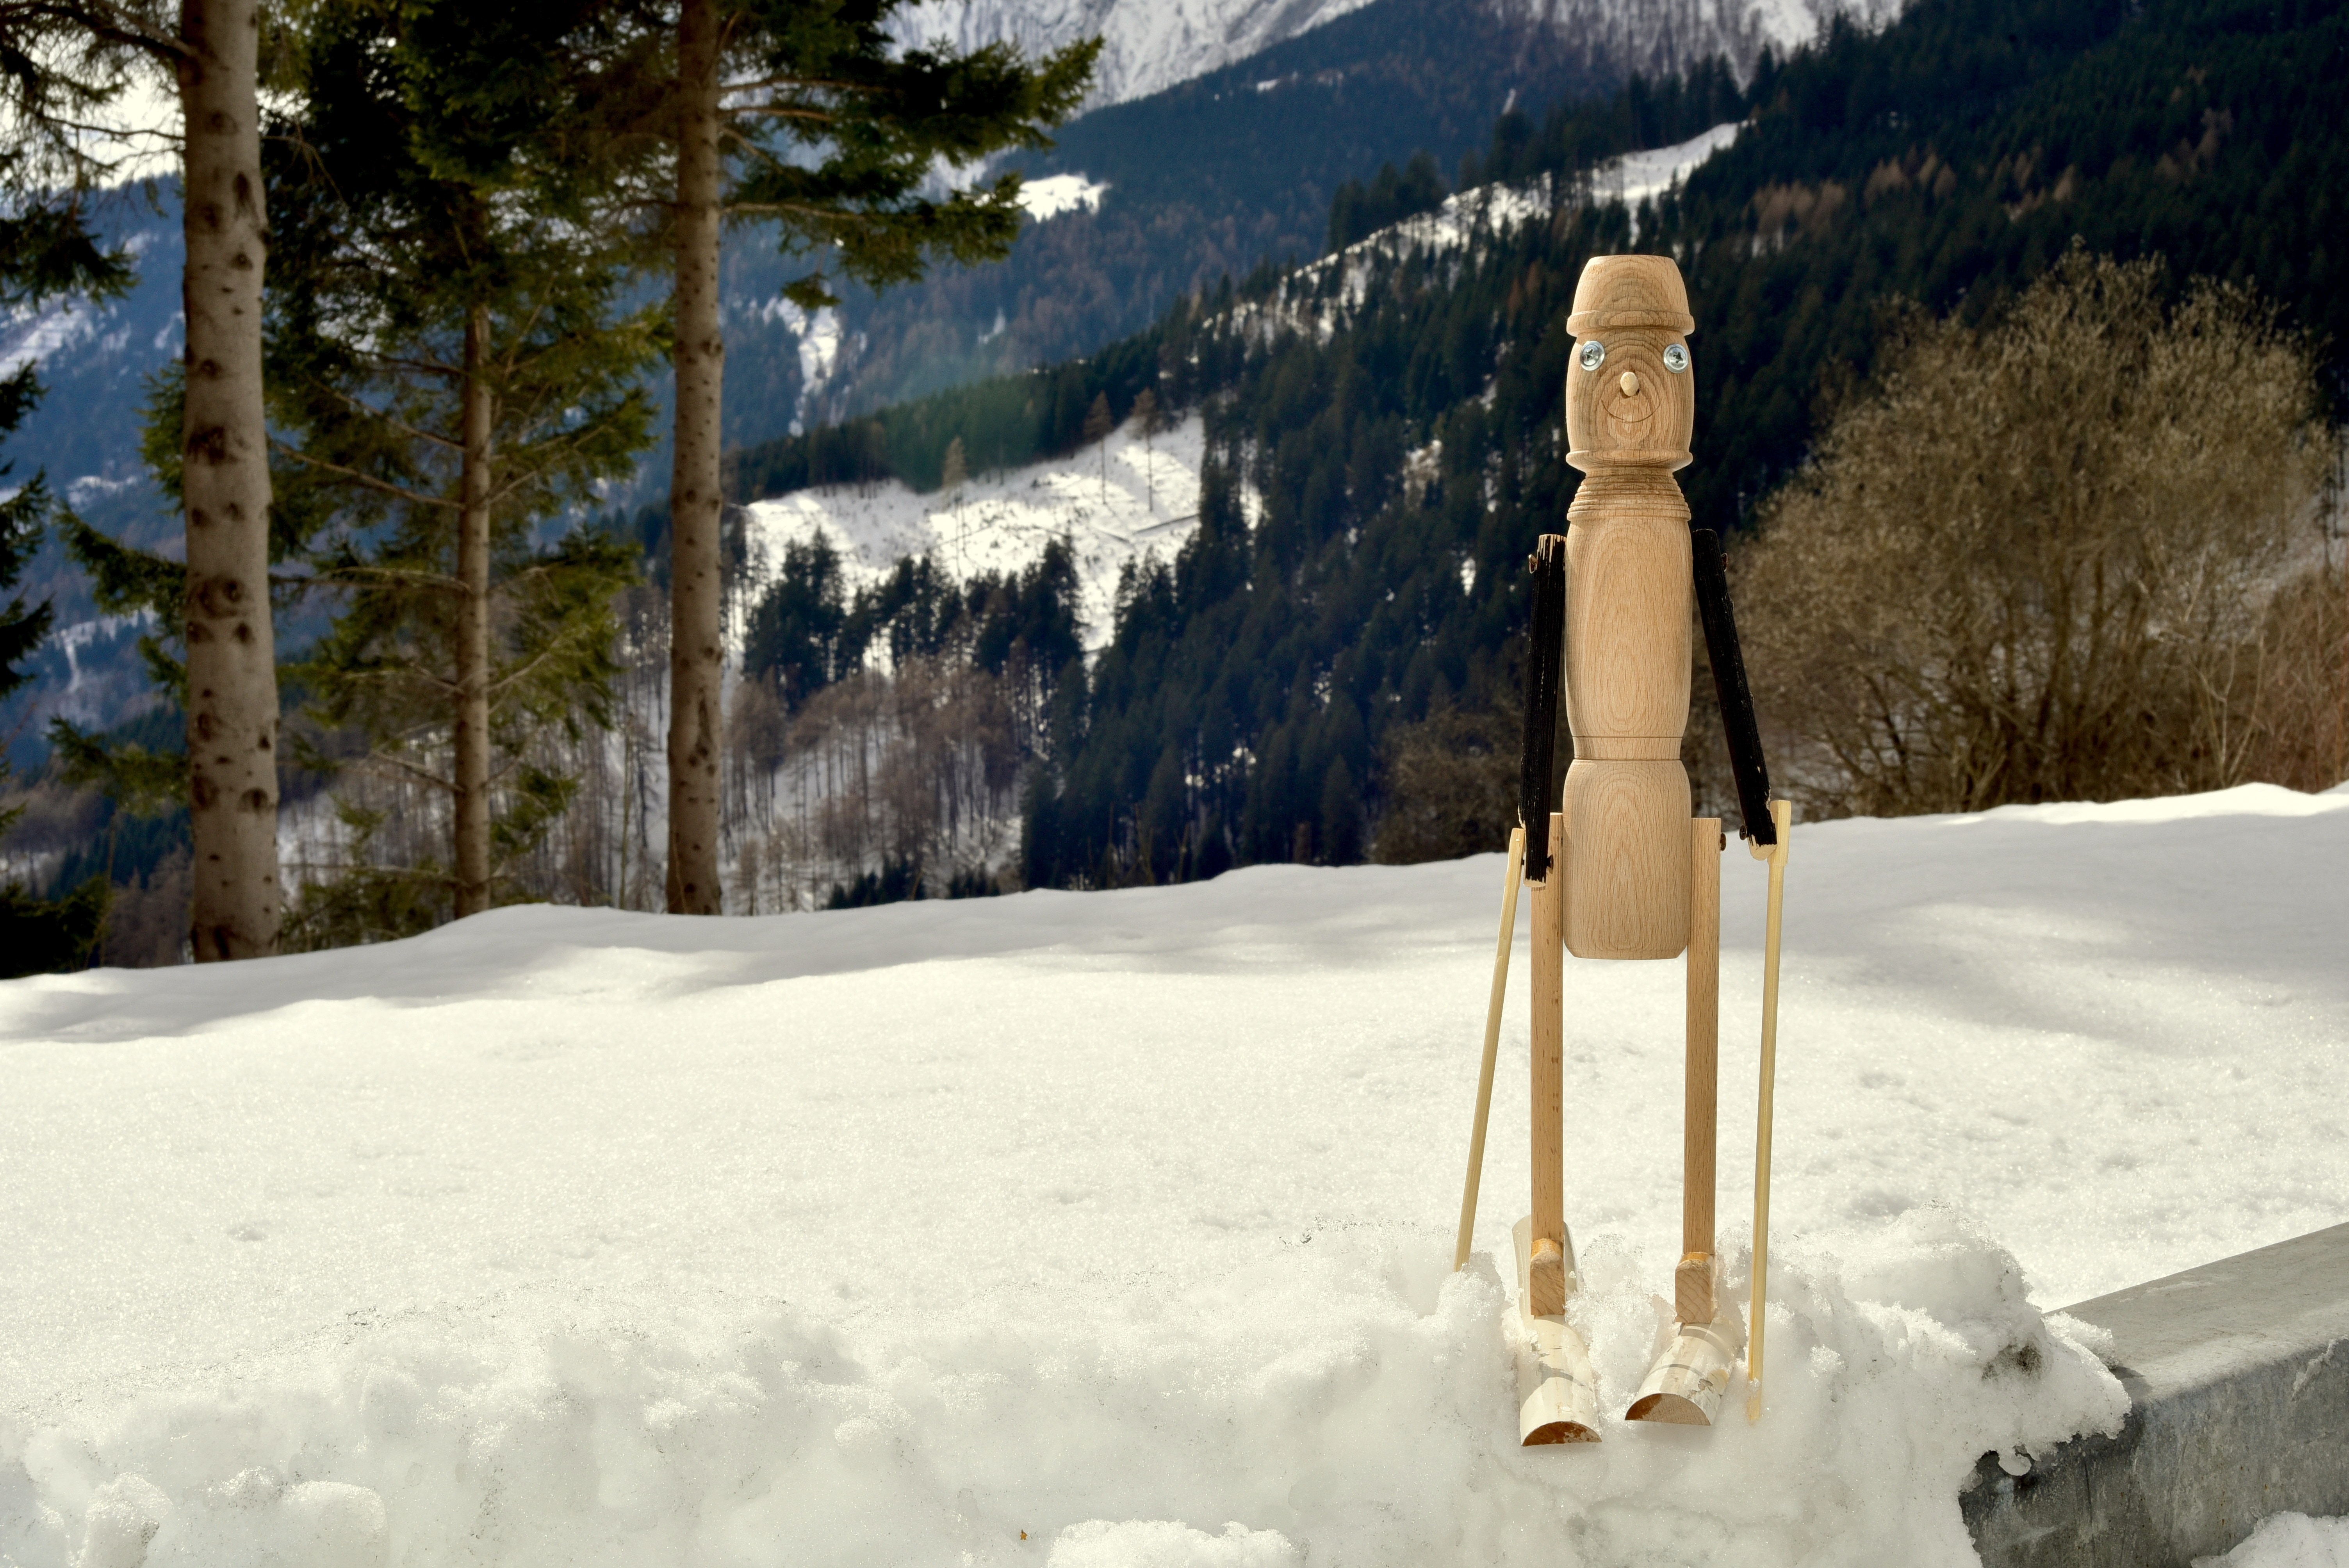 brown and black wooden puppet standing on snow surrounded with trees at daytime